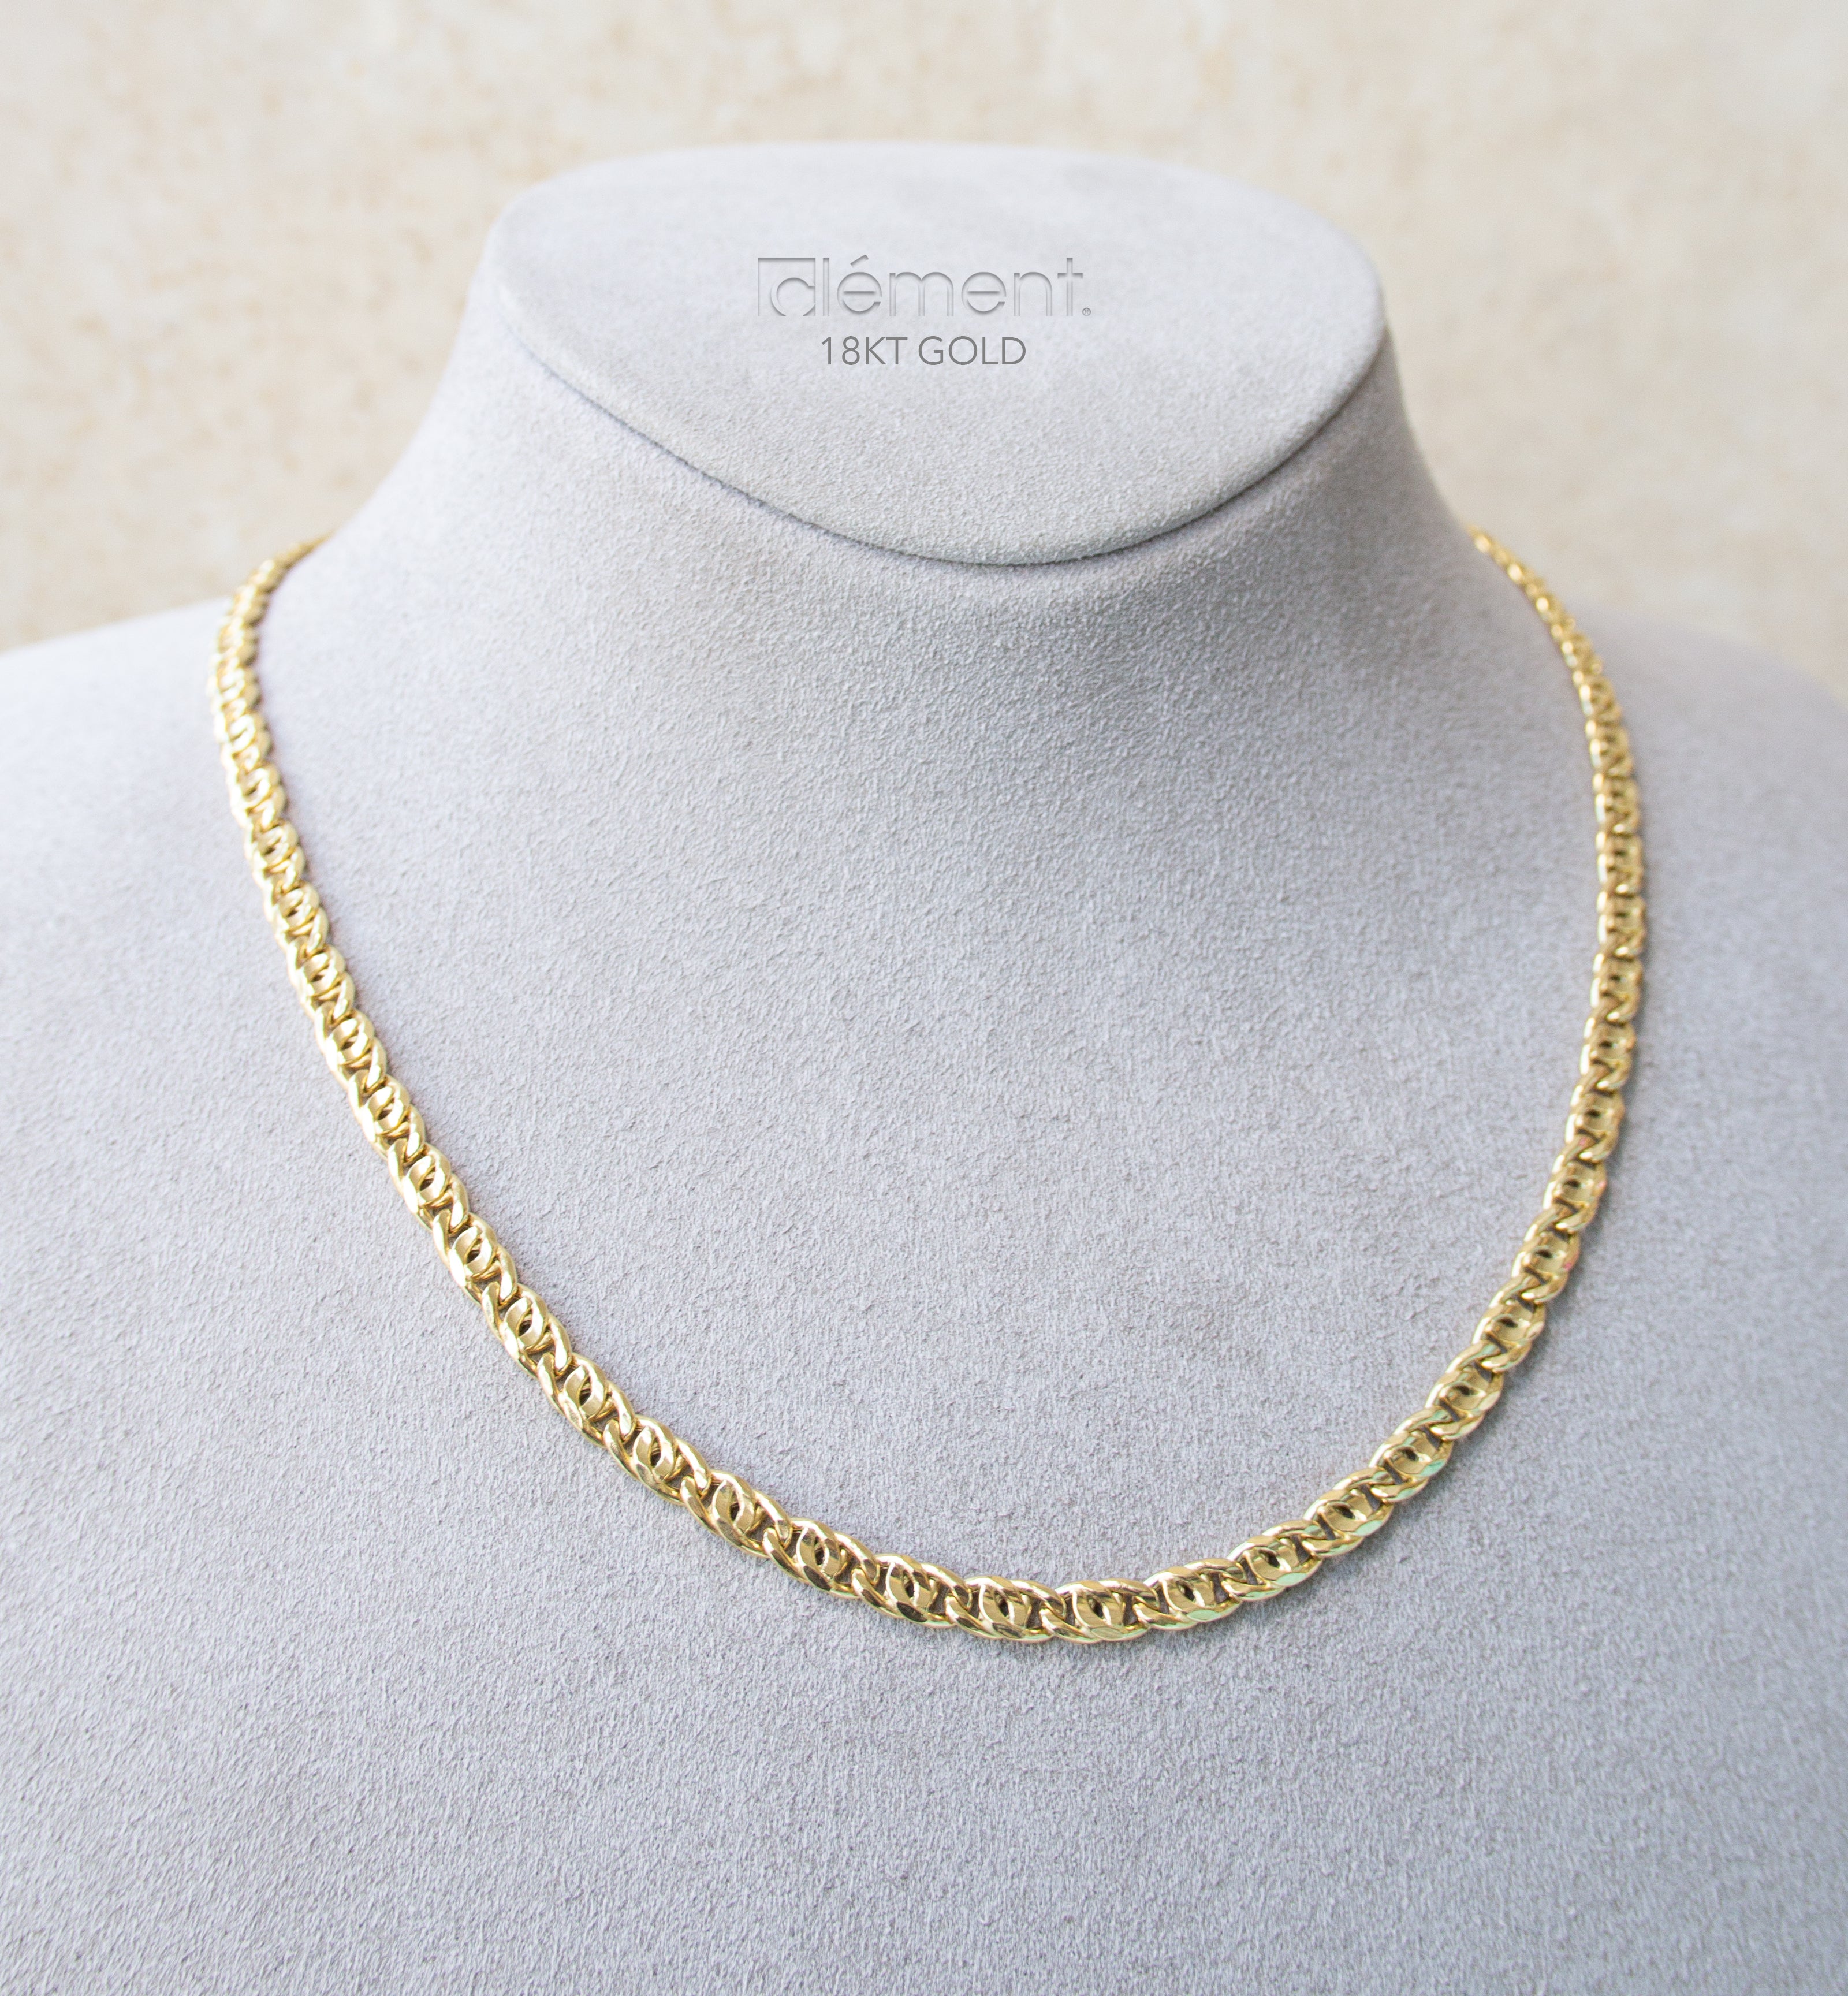 18ct Gold Diamond Necklace | Aspinal of London